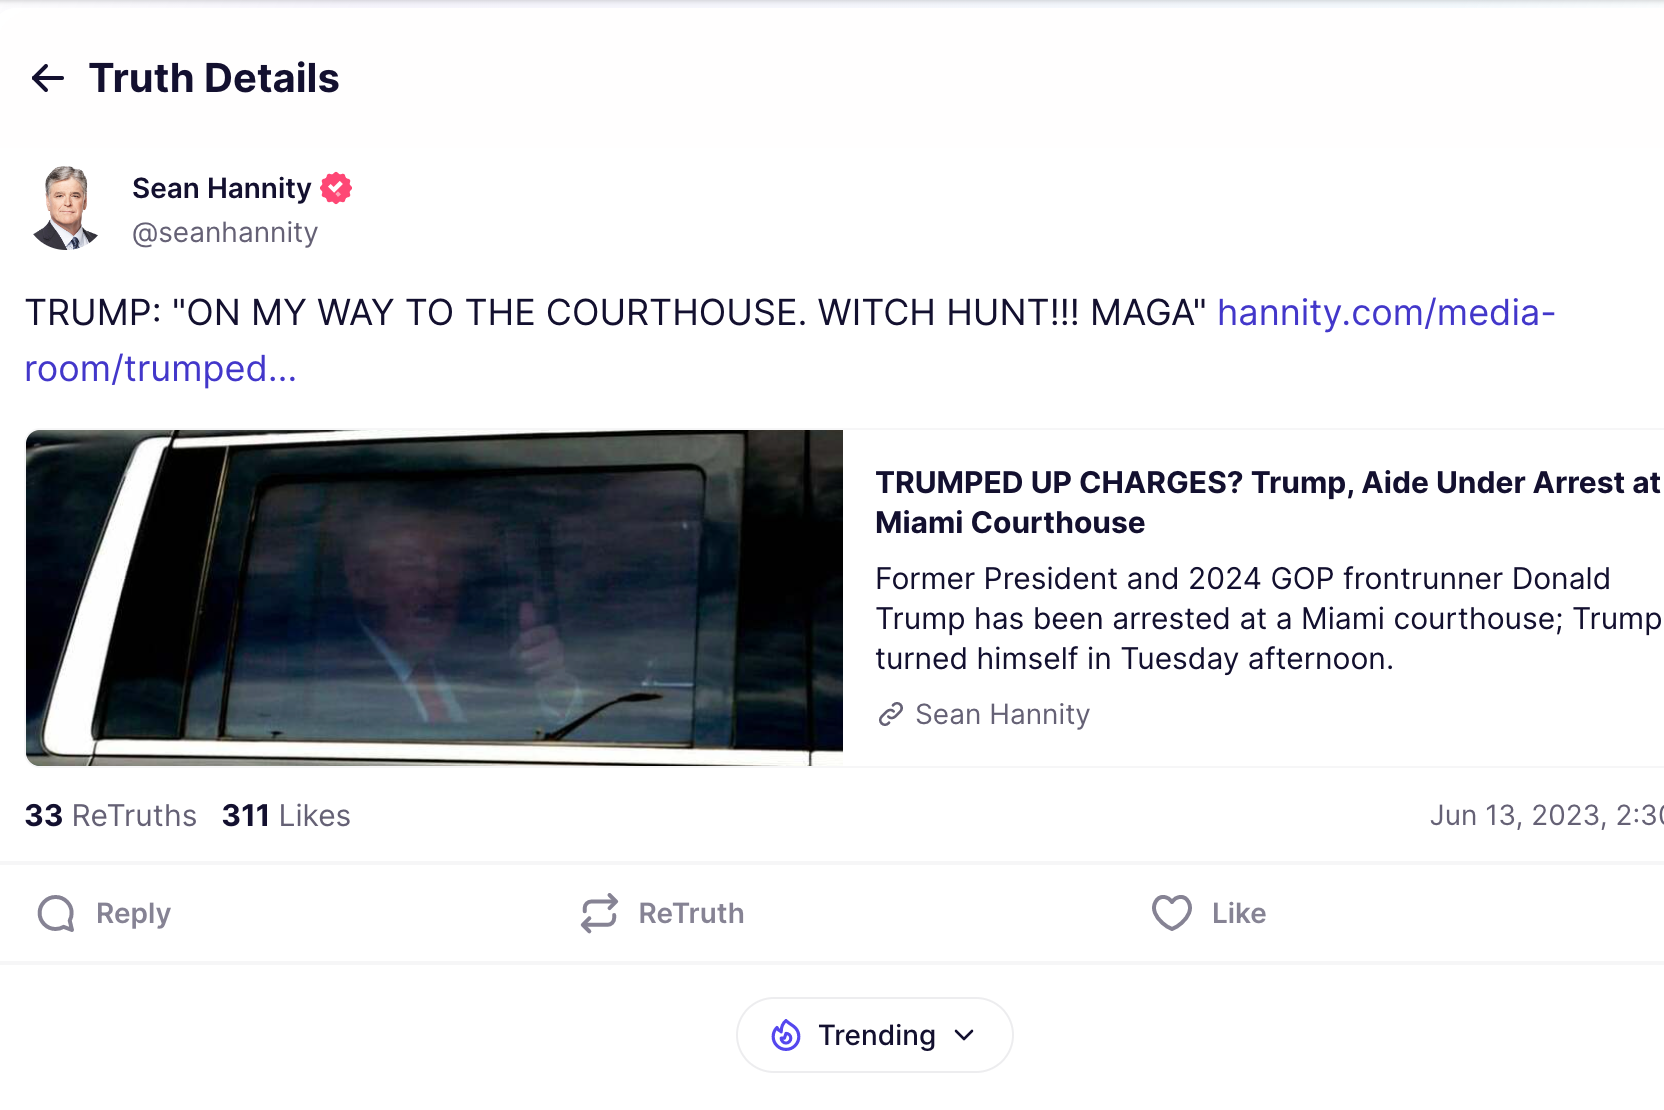 A Sean Hannity post in which he rewrites Trump's courthouse/witch hunt Truth